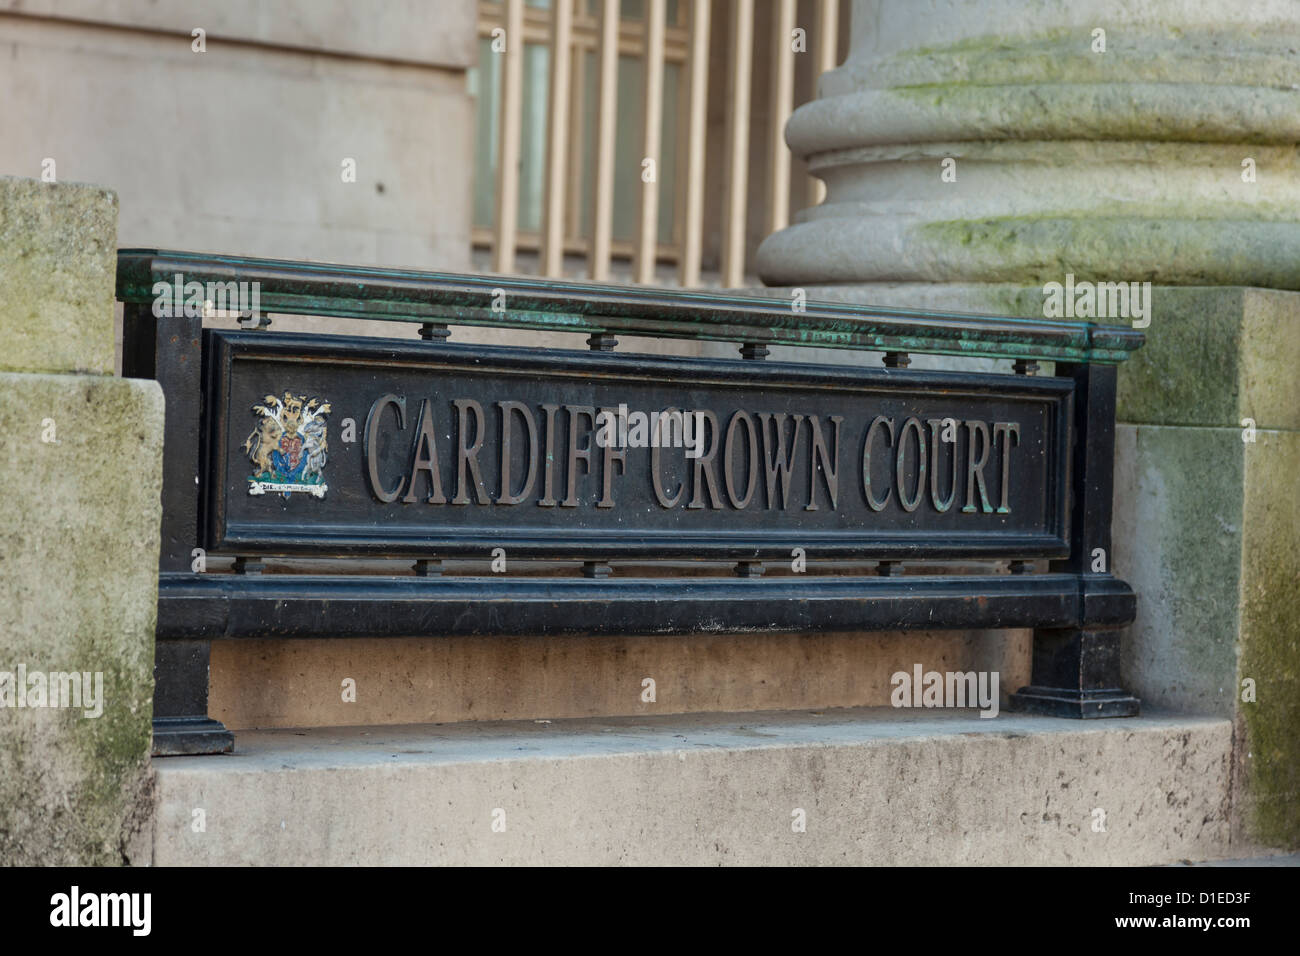 Cardiff Crown Court, law courts, Cardiff civic centre center, Cardiff, Wales, UK. Stock Photo